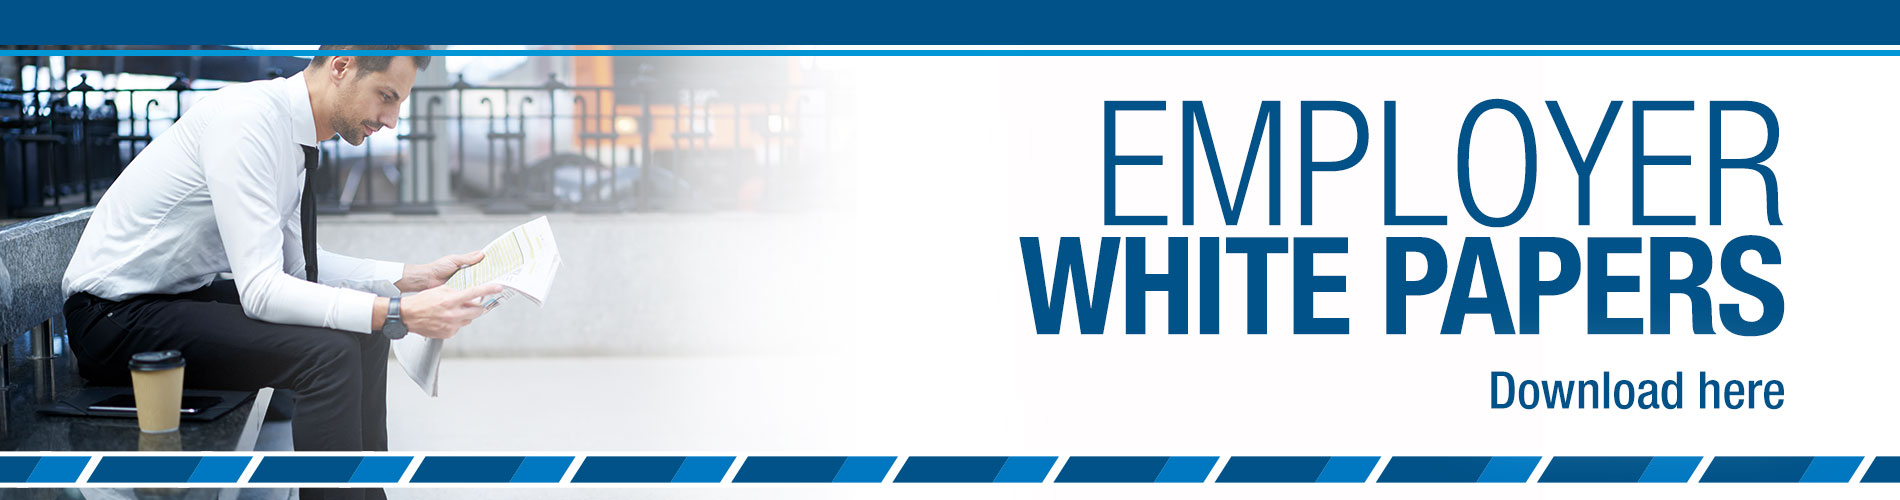 Employer White Papers Front Page Banner